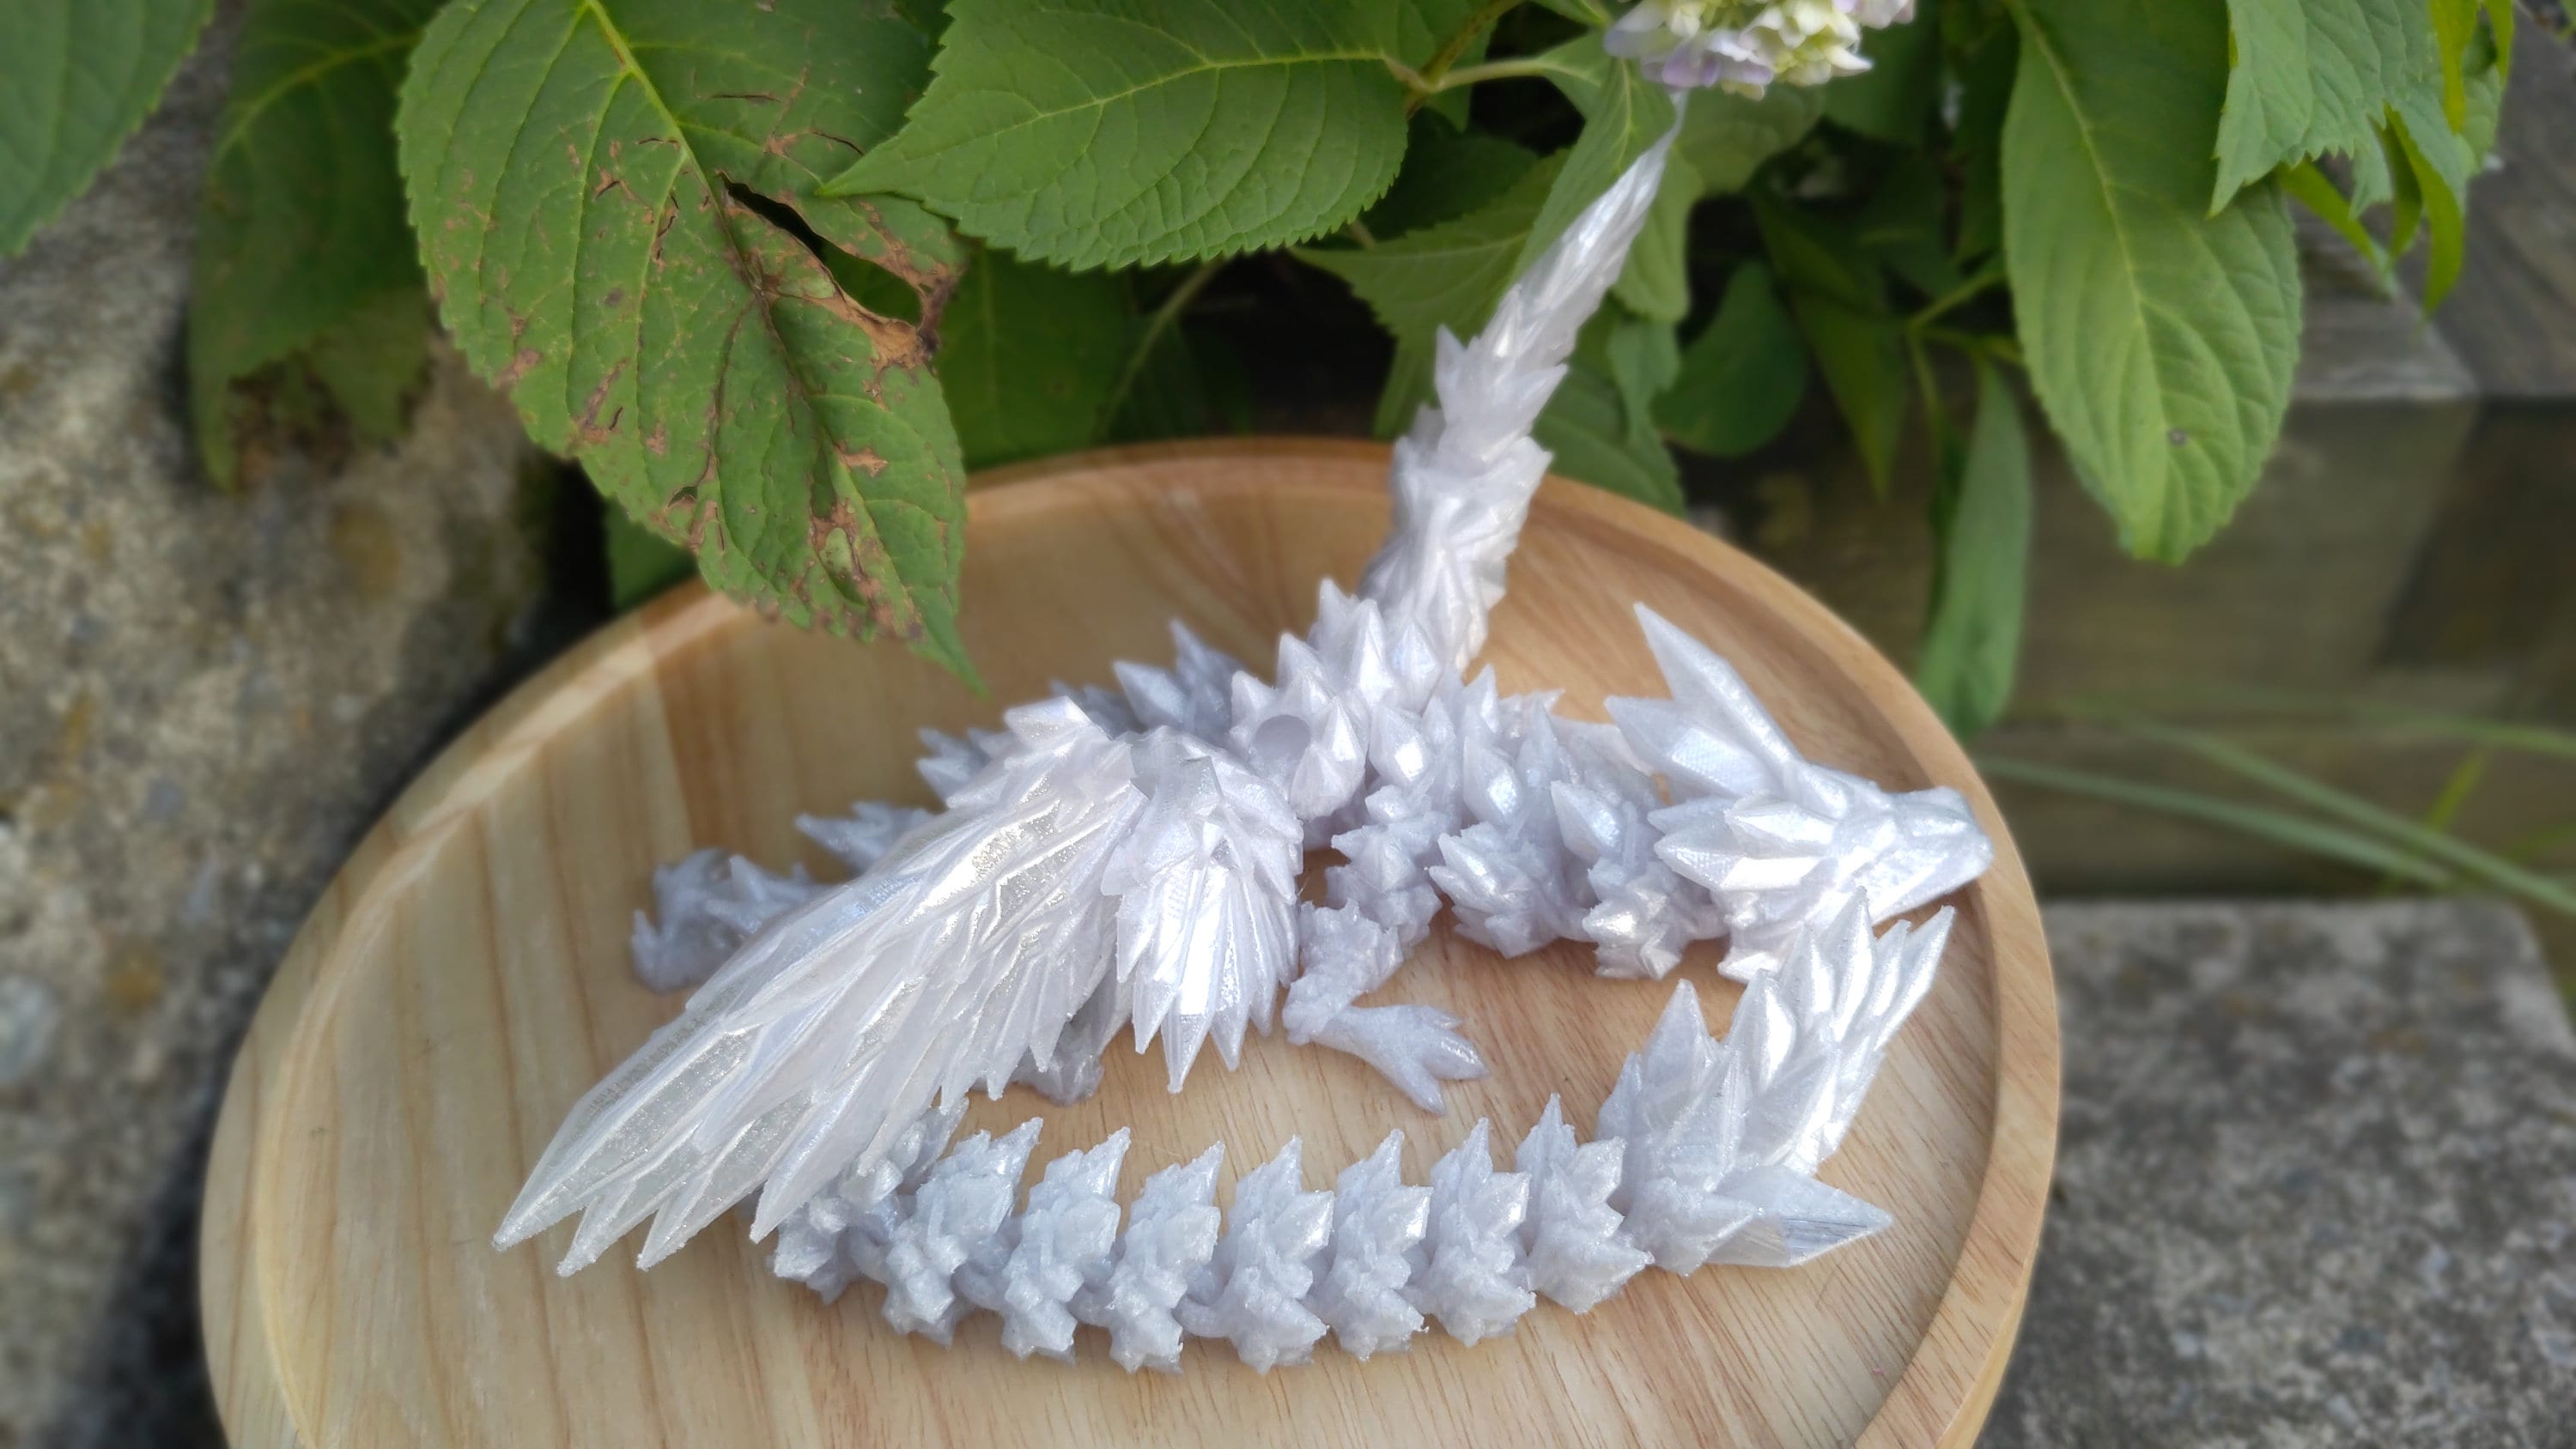 Silver shimmer Crystal Winged Dragon. Crystal Winged Dragon 3D printed articulating dragon Fidget, Flexi, Toy 18 in. Stress Relief, Gift.